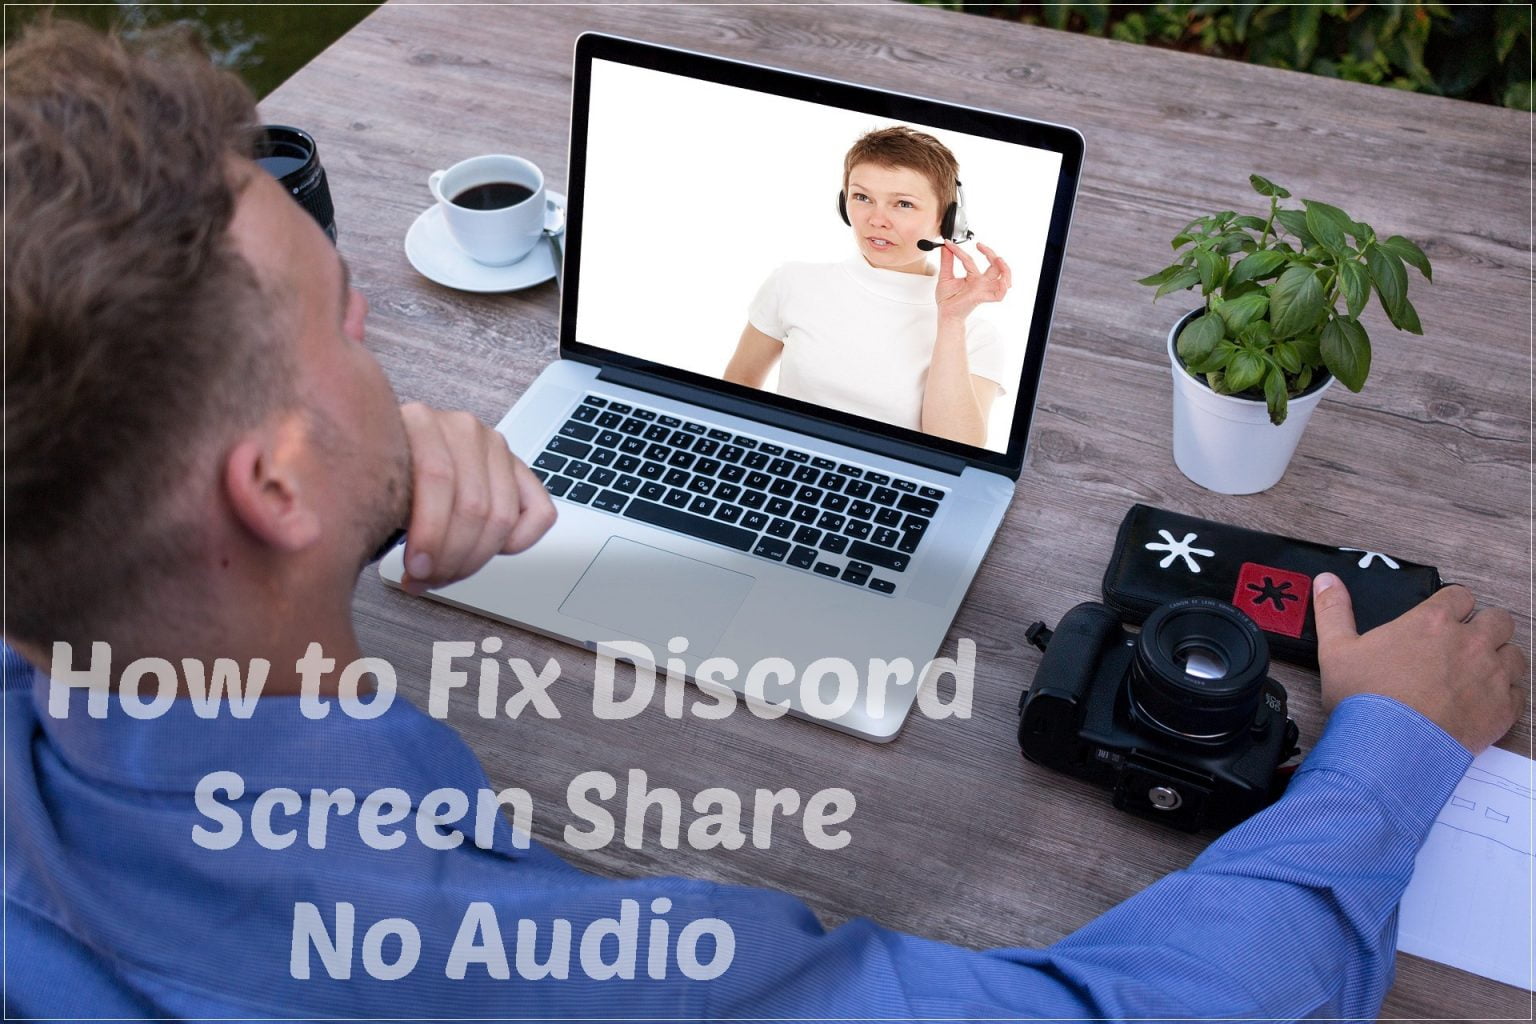 How to Fix Discord Screen Share No Audio (2020)